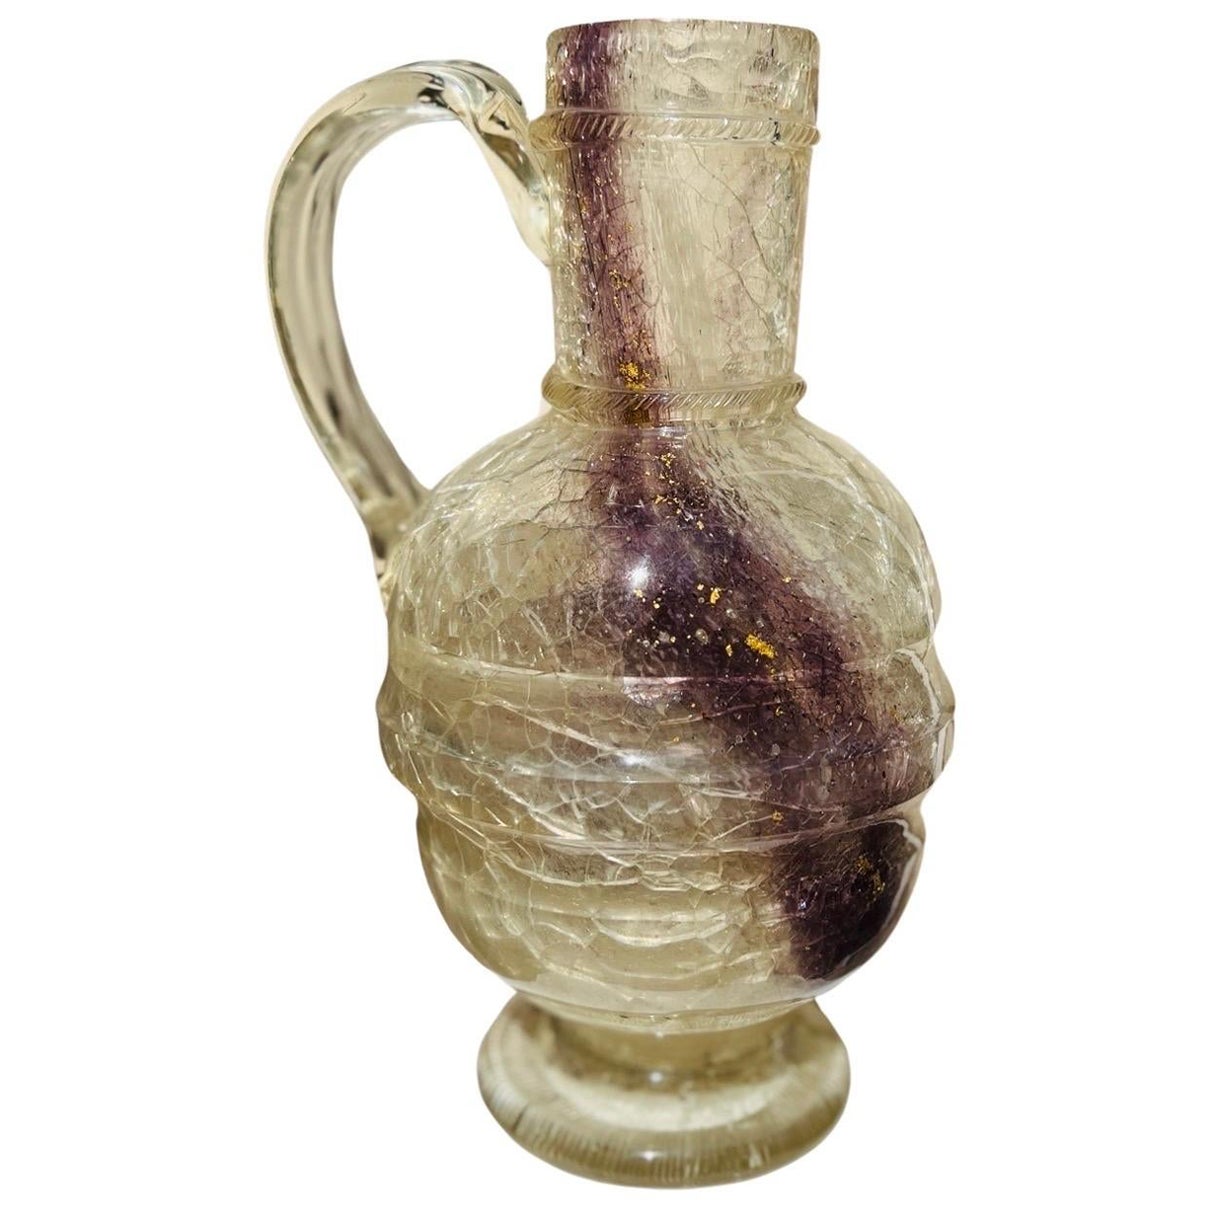 After The Roman Antique - Rock Crystal, Glass & Gold Flecking Grand Tour Pitcher